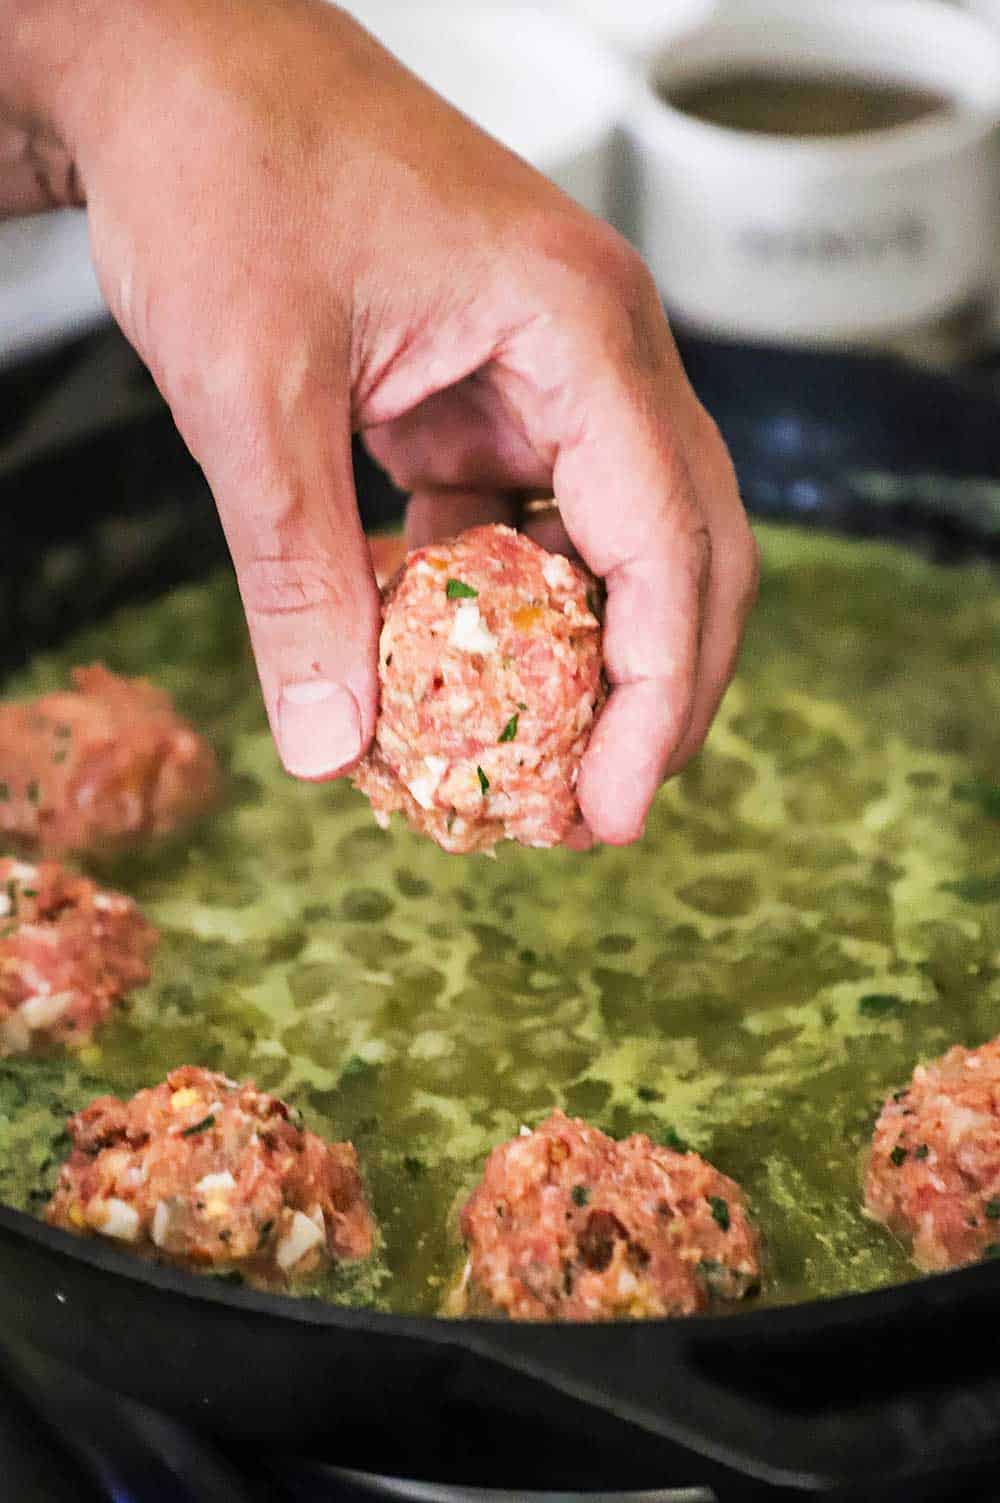 A person's hand placing an uncooked meatball into a skillet of simmering salsa verde.